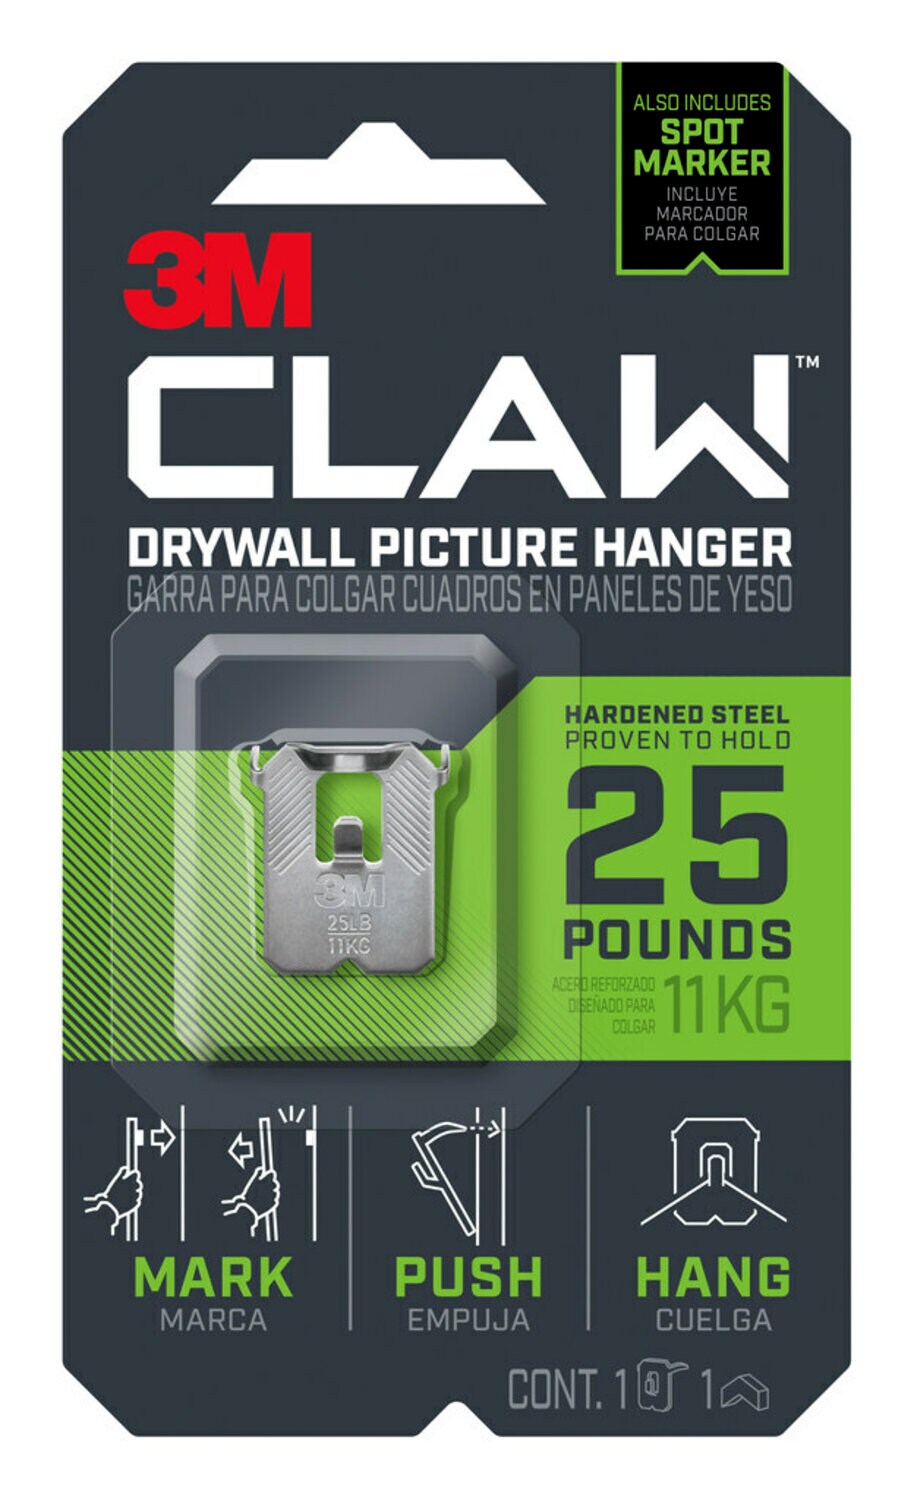 7100233219 - 3M CLAW Drywall Picture Hanger 25 lb with Temporary Spot Marker 3PH25M-1ES, 1 hanger, 1 marker